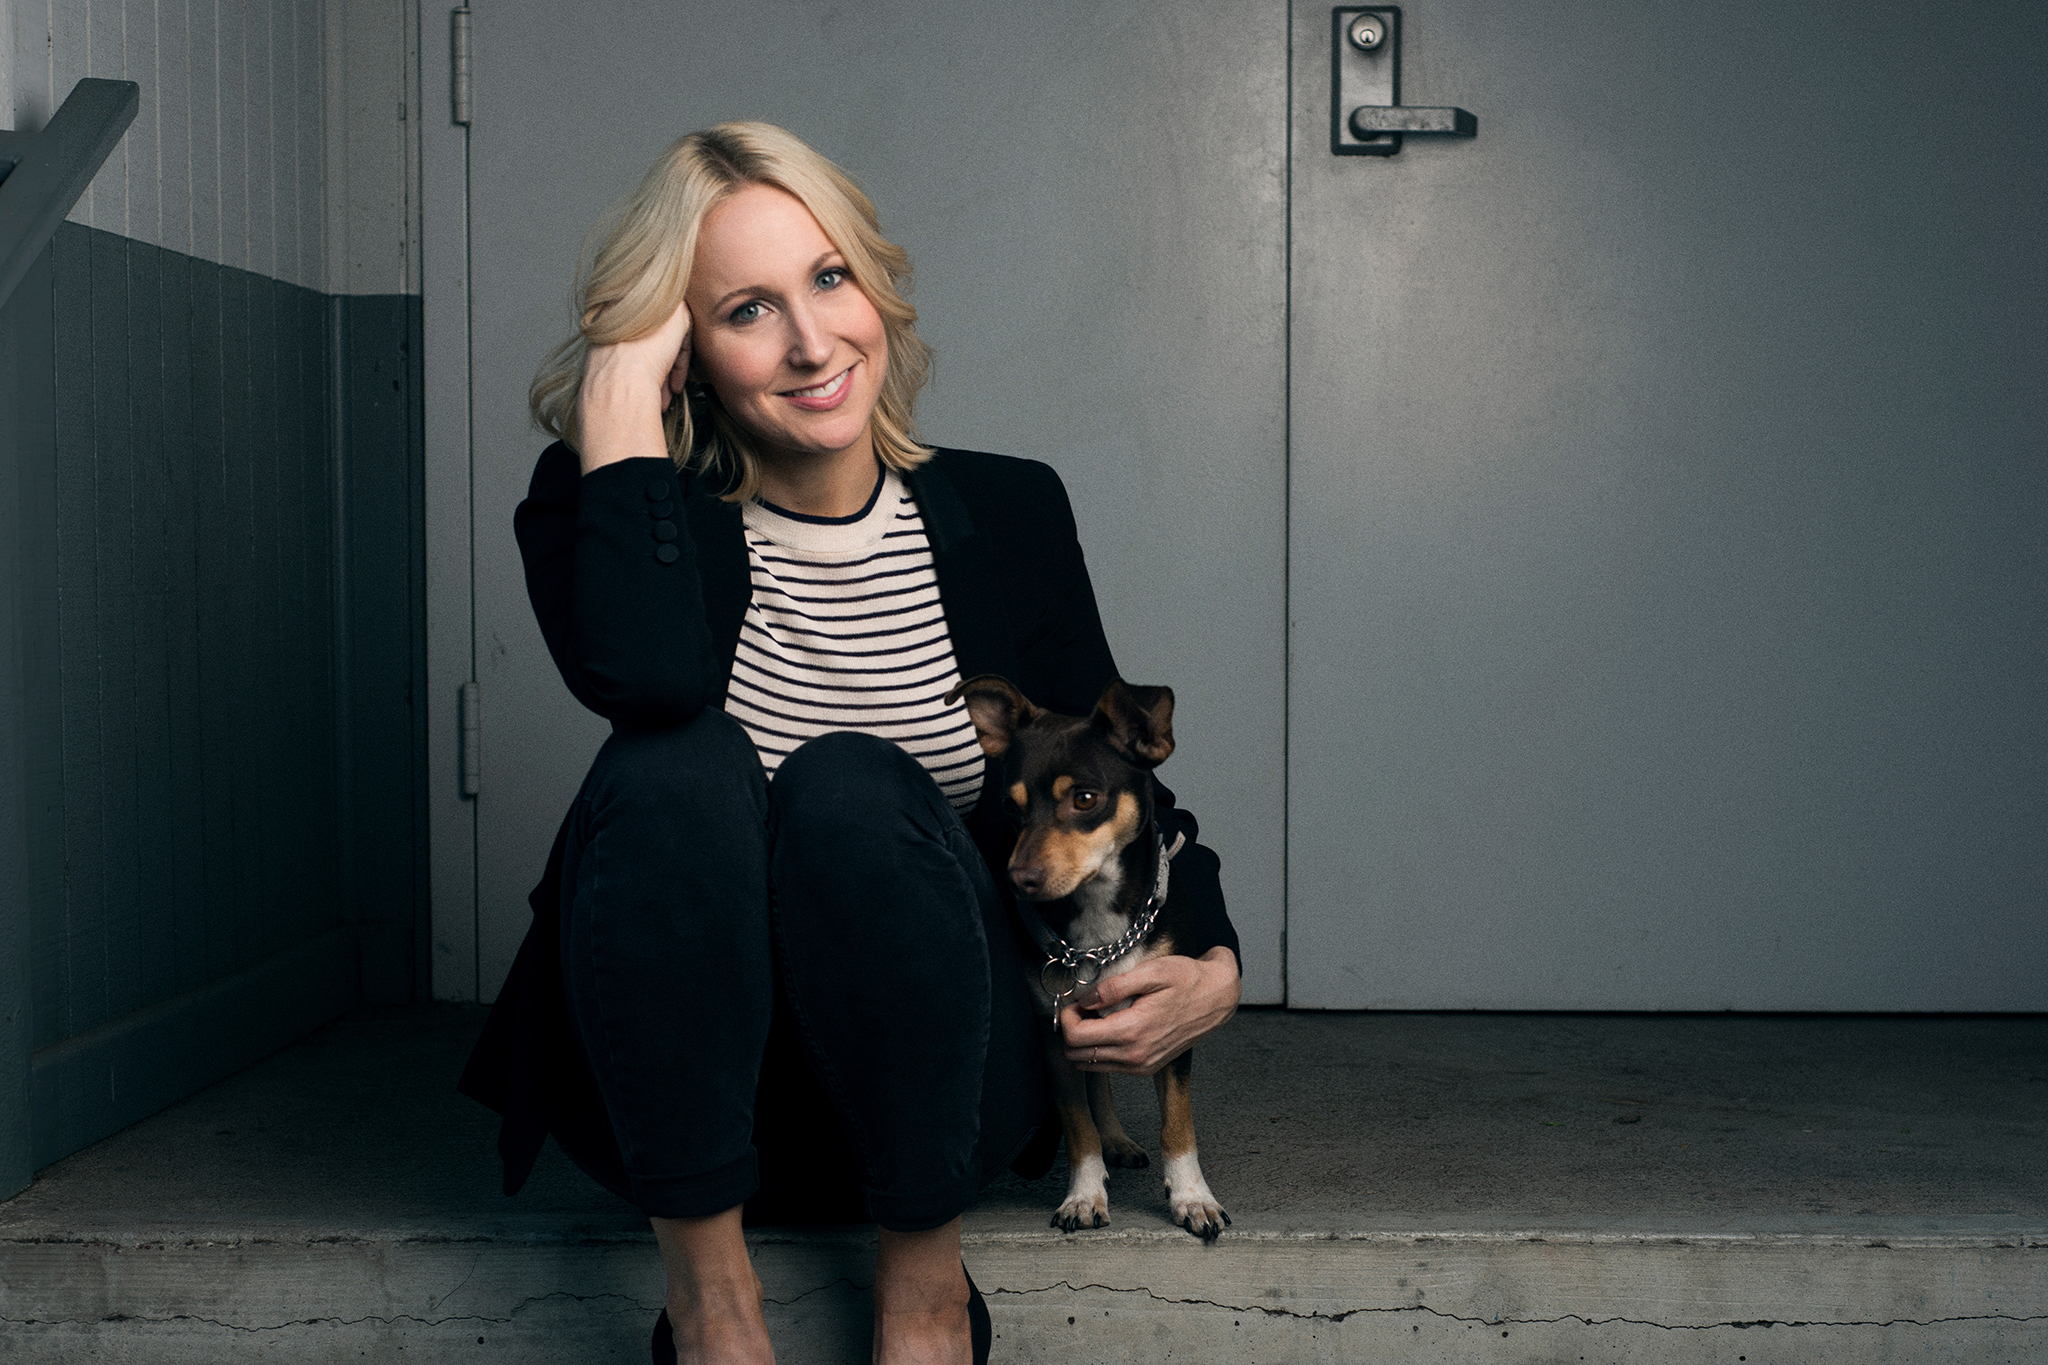 Nikki Glaser on her Comedy Central show, porn stars and "the talk"